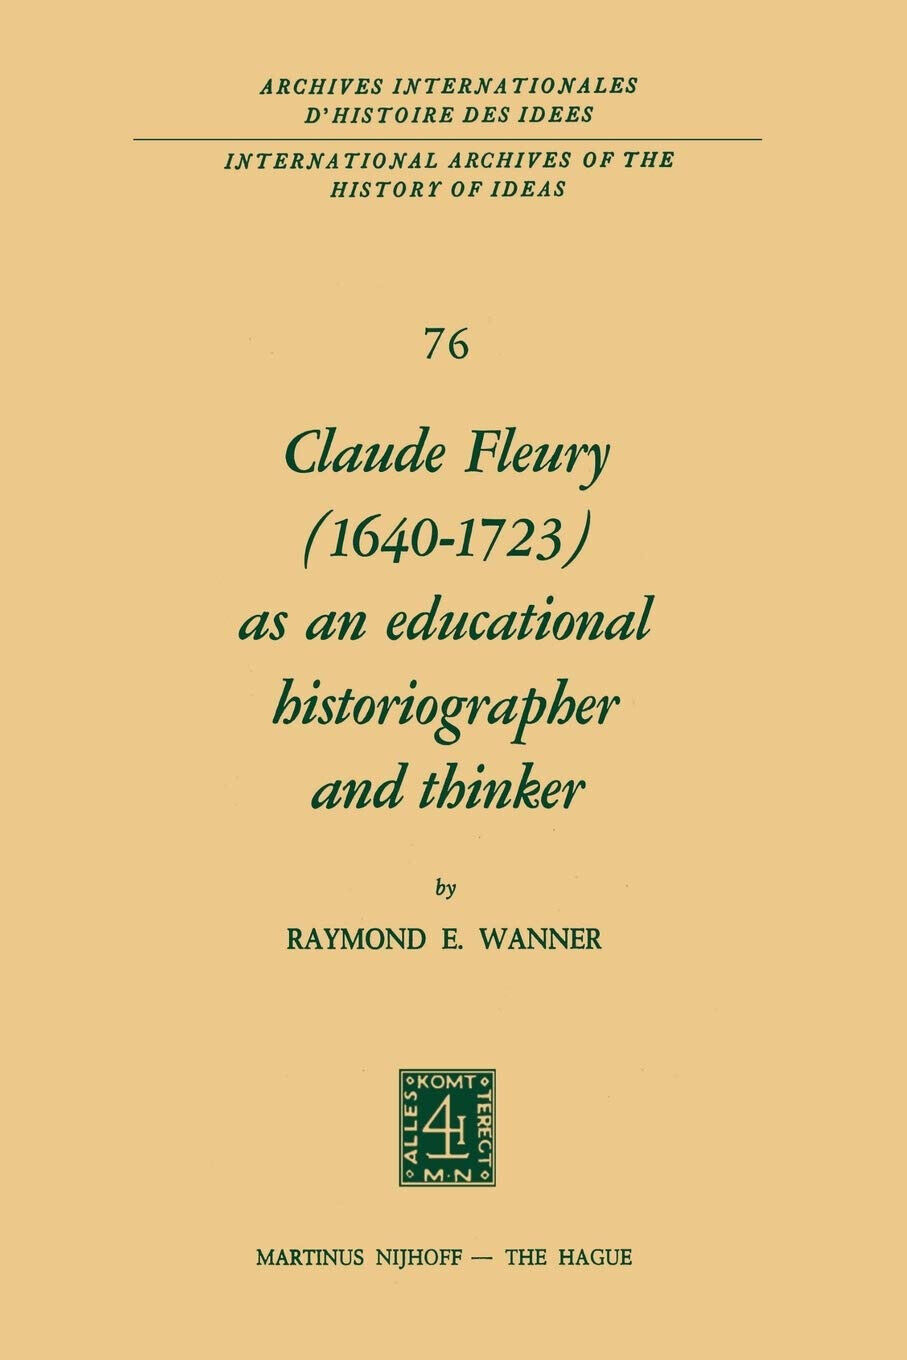 Claude Fleury (1640-1723) as an Educational Historiographer and Thinker - 2013